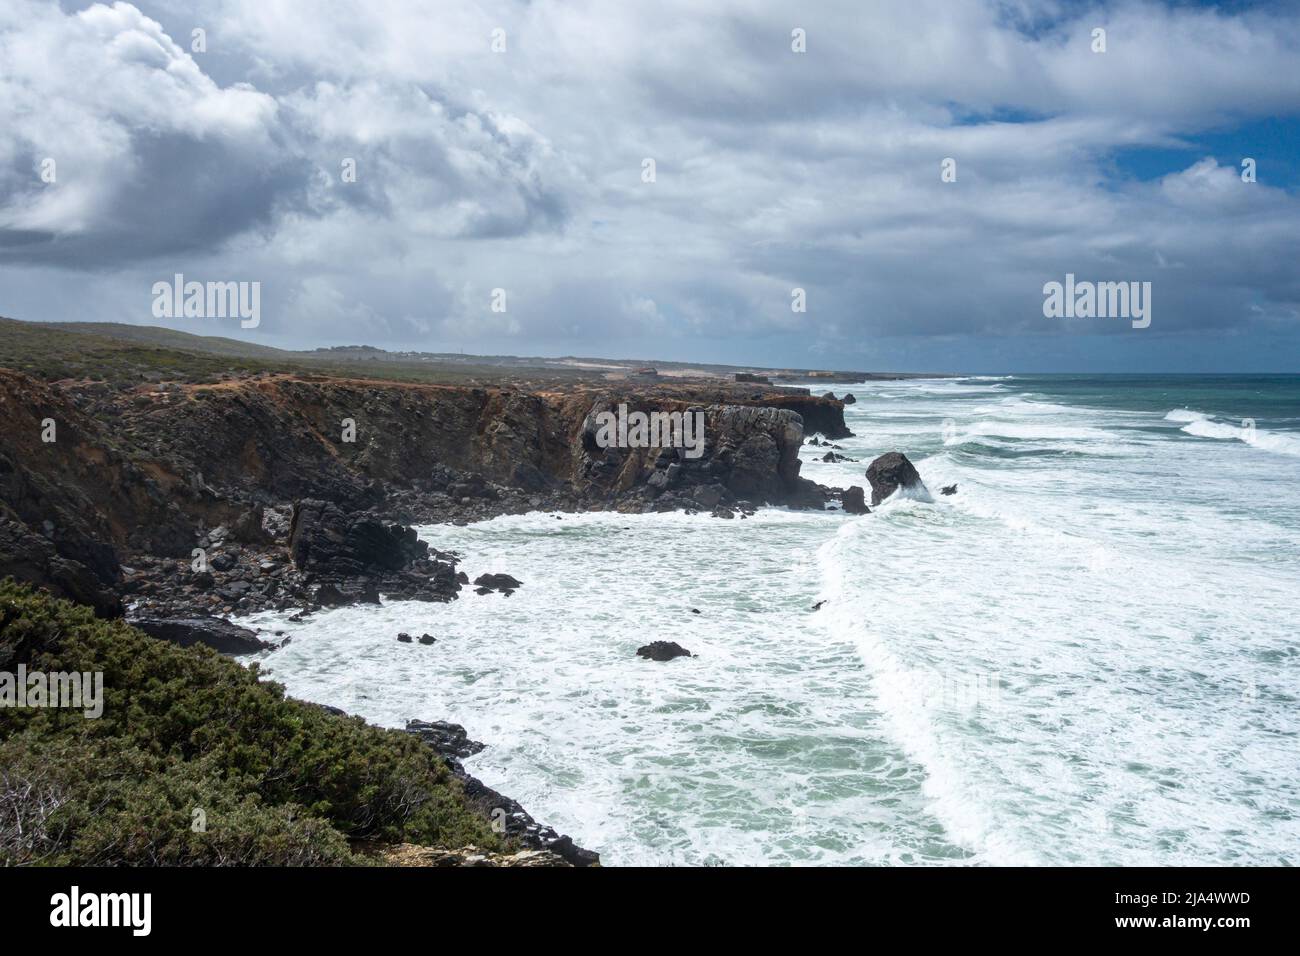 Large and numerous Atlantic Oceas waves rolling into the rocky coastline by Guincho Beach - Praia do Guincho with dramatic clouds in the sky against t Stock Photo